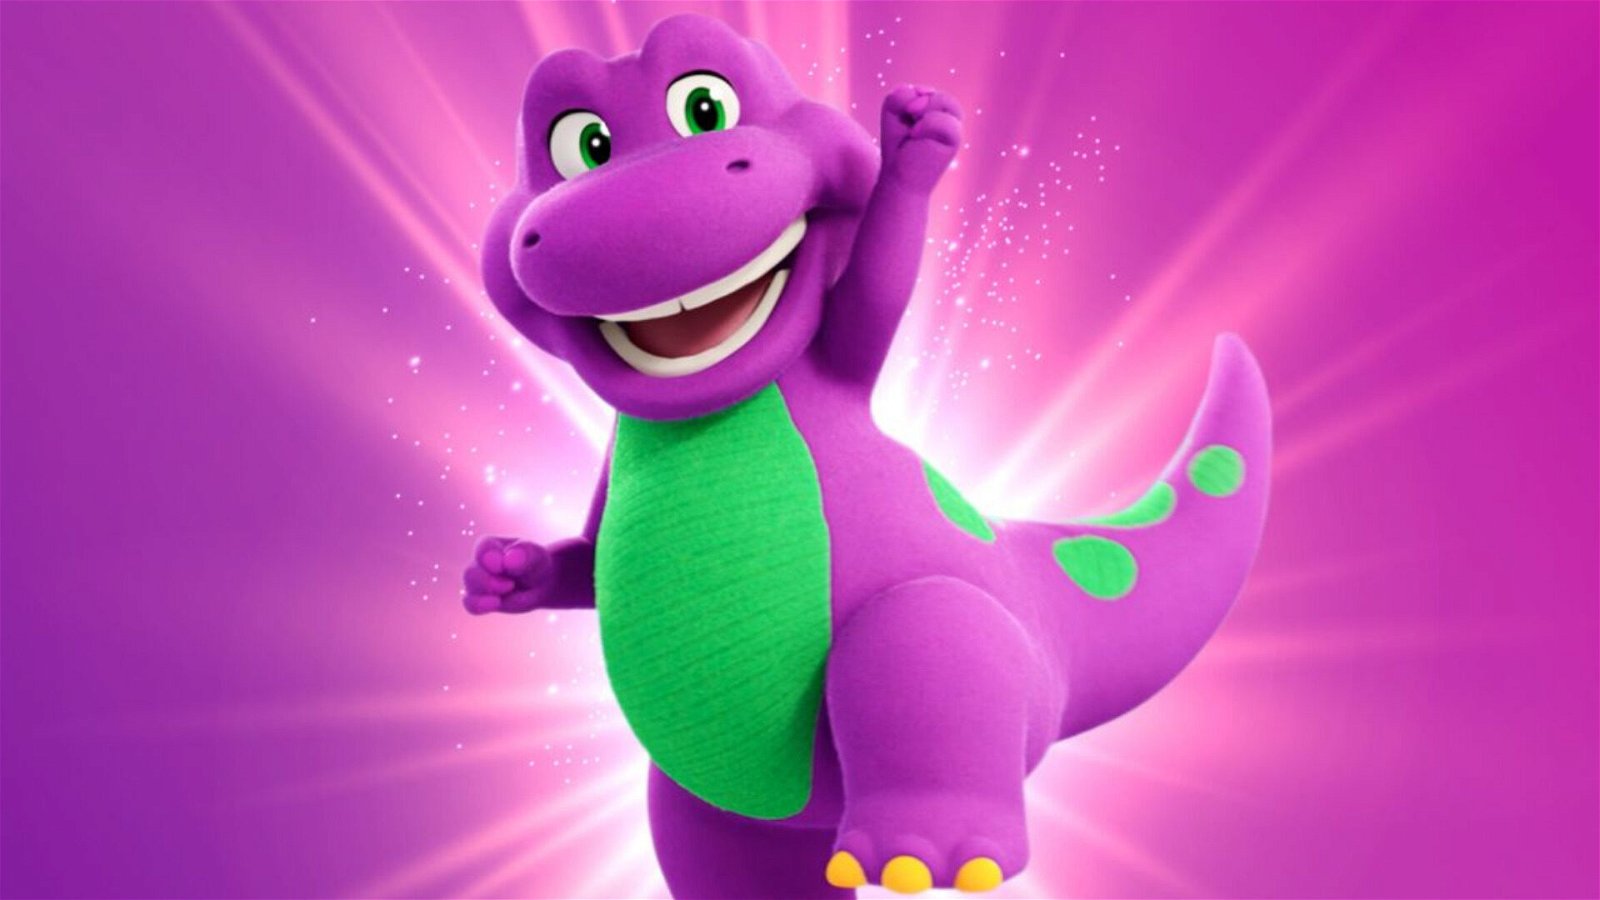 barney reboot has fans giving mixed feelings over redesign 23021502